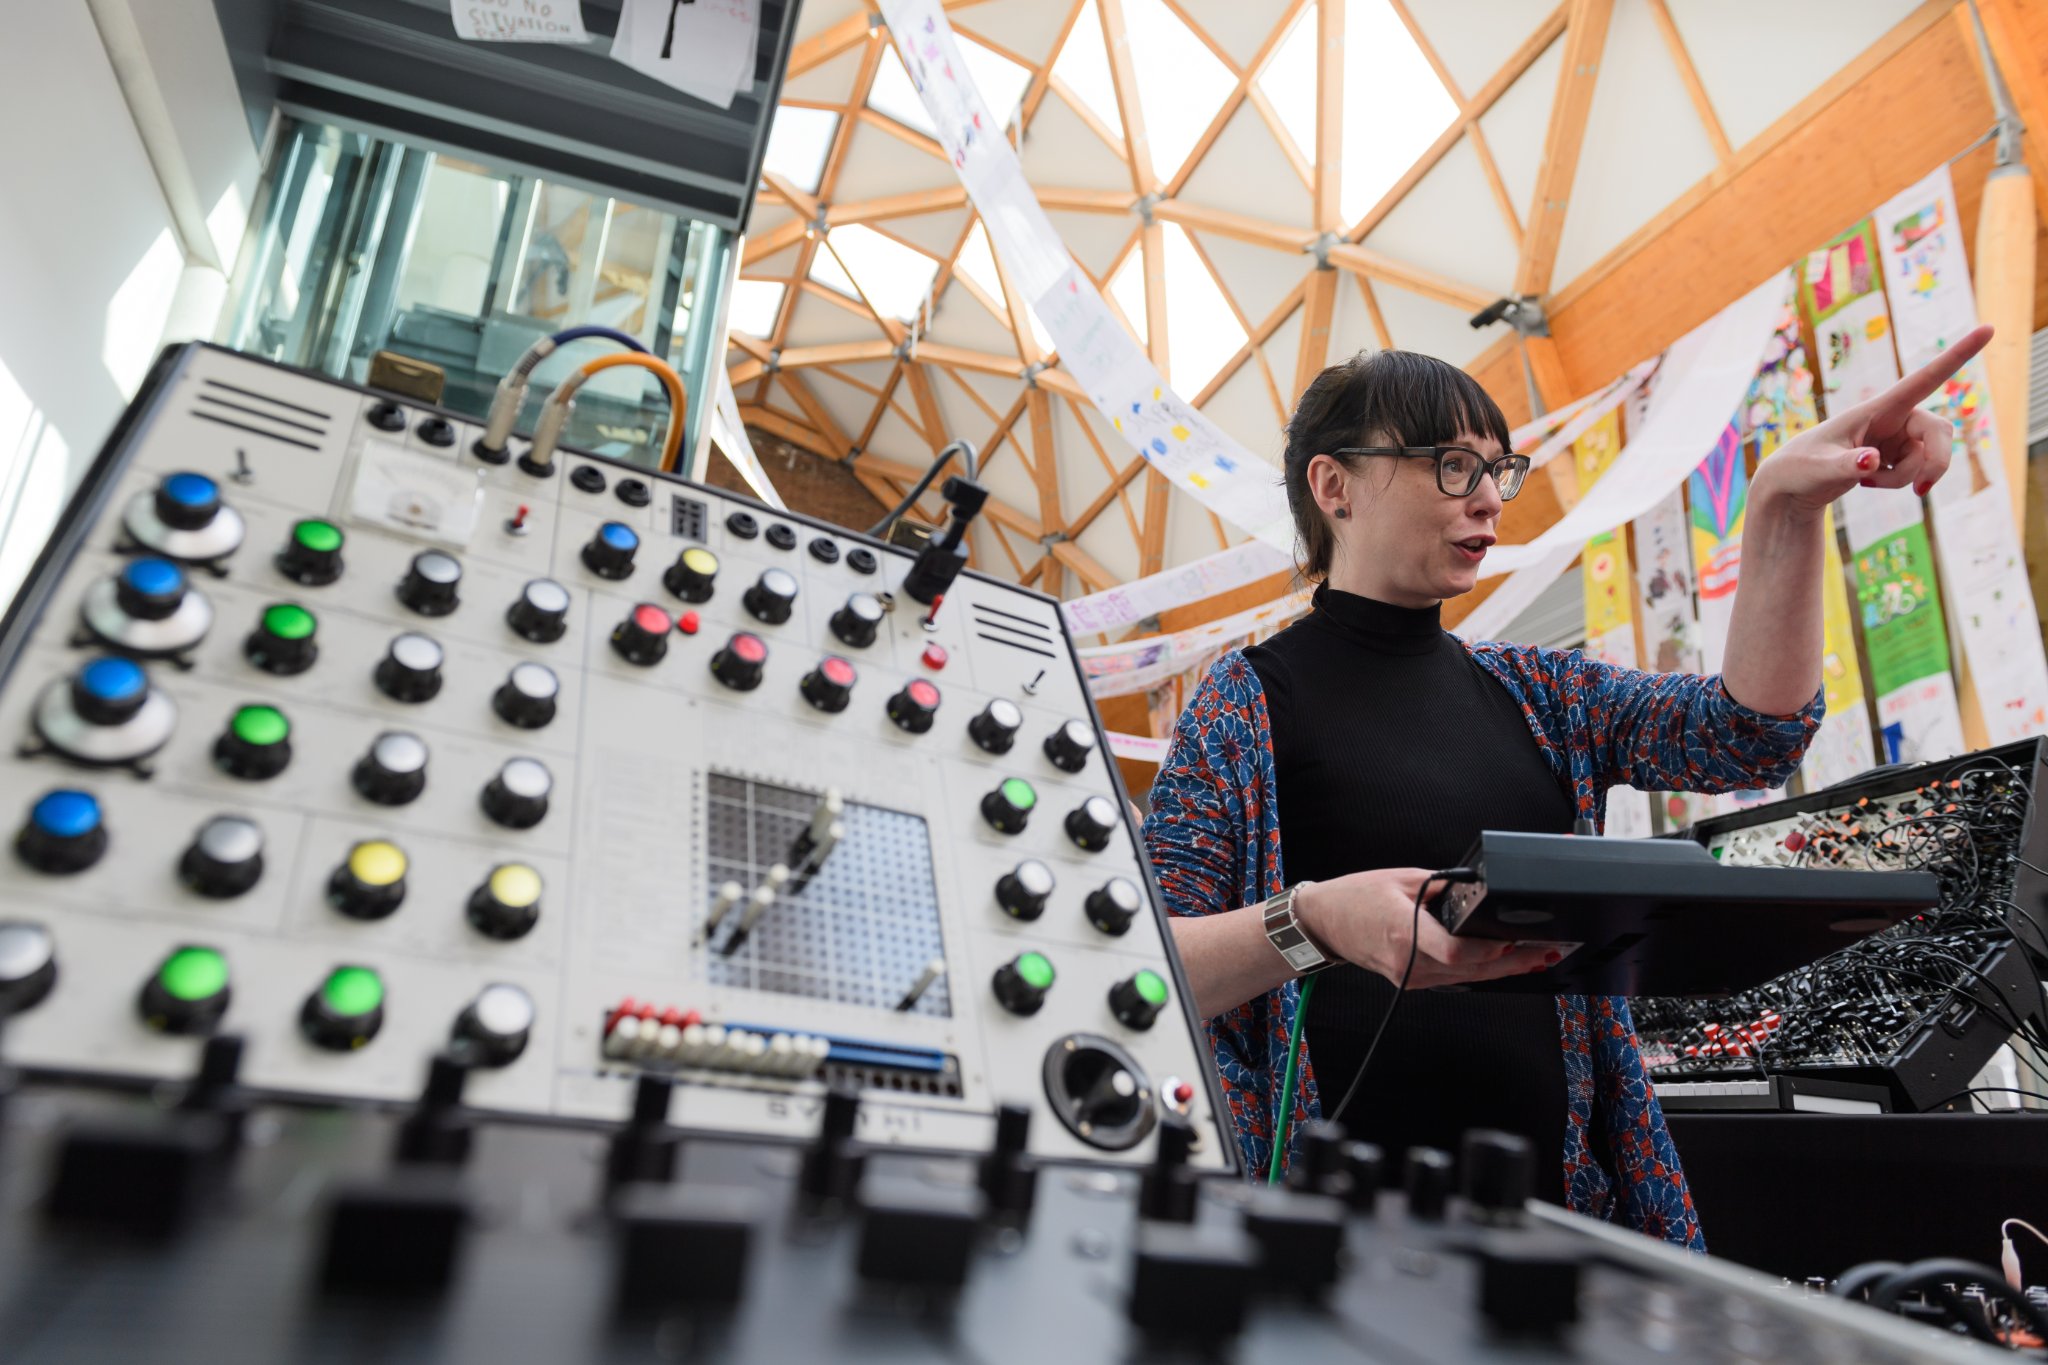 A woman holding a keyboard and pointing, standing next to a synthesiser in the Herbert's covered court